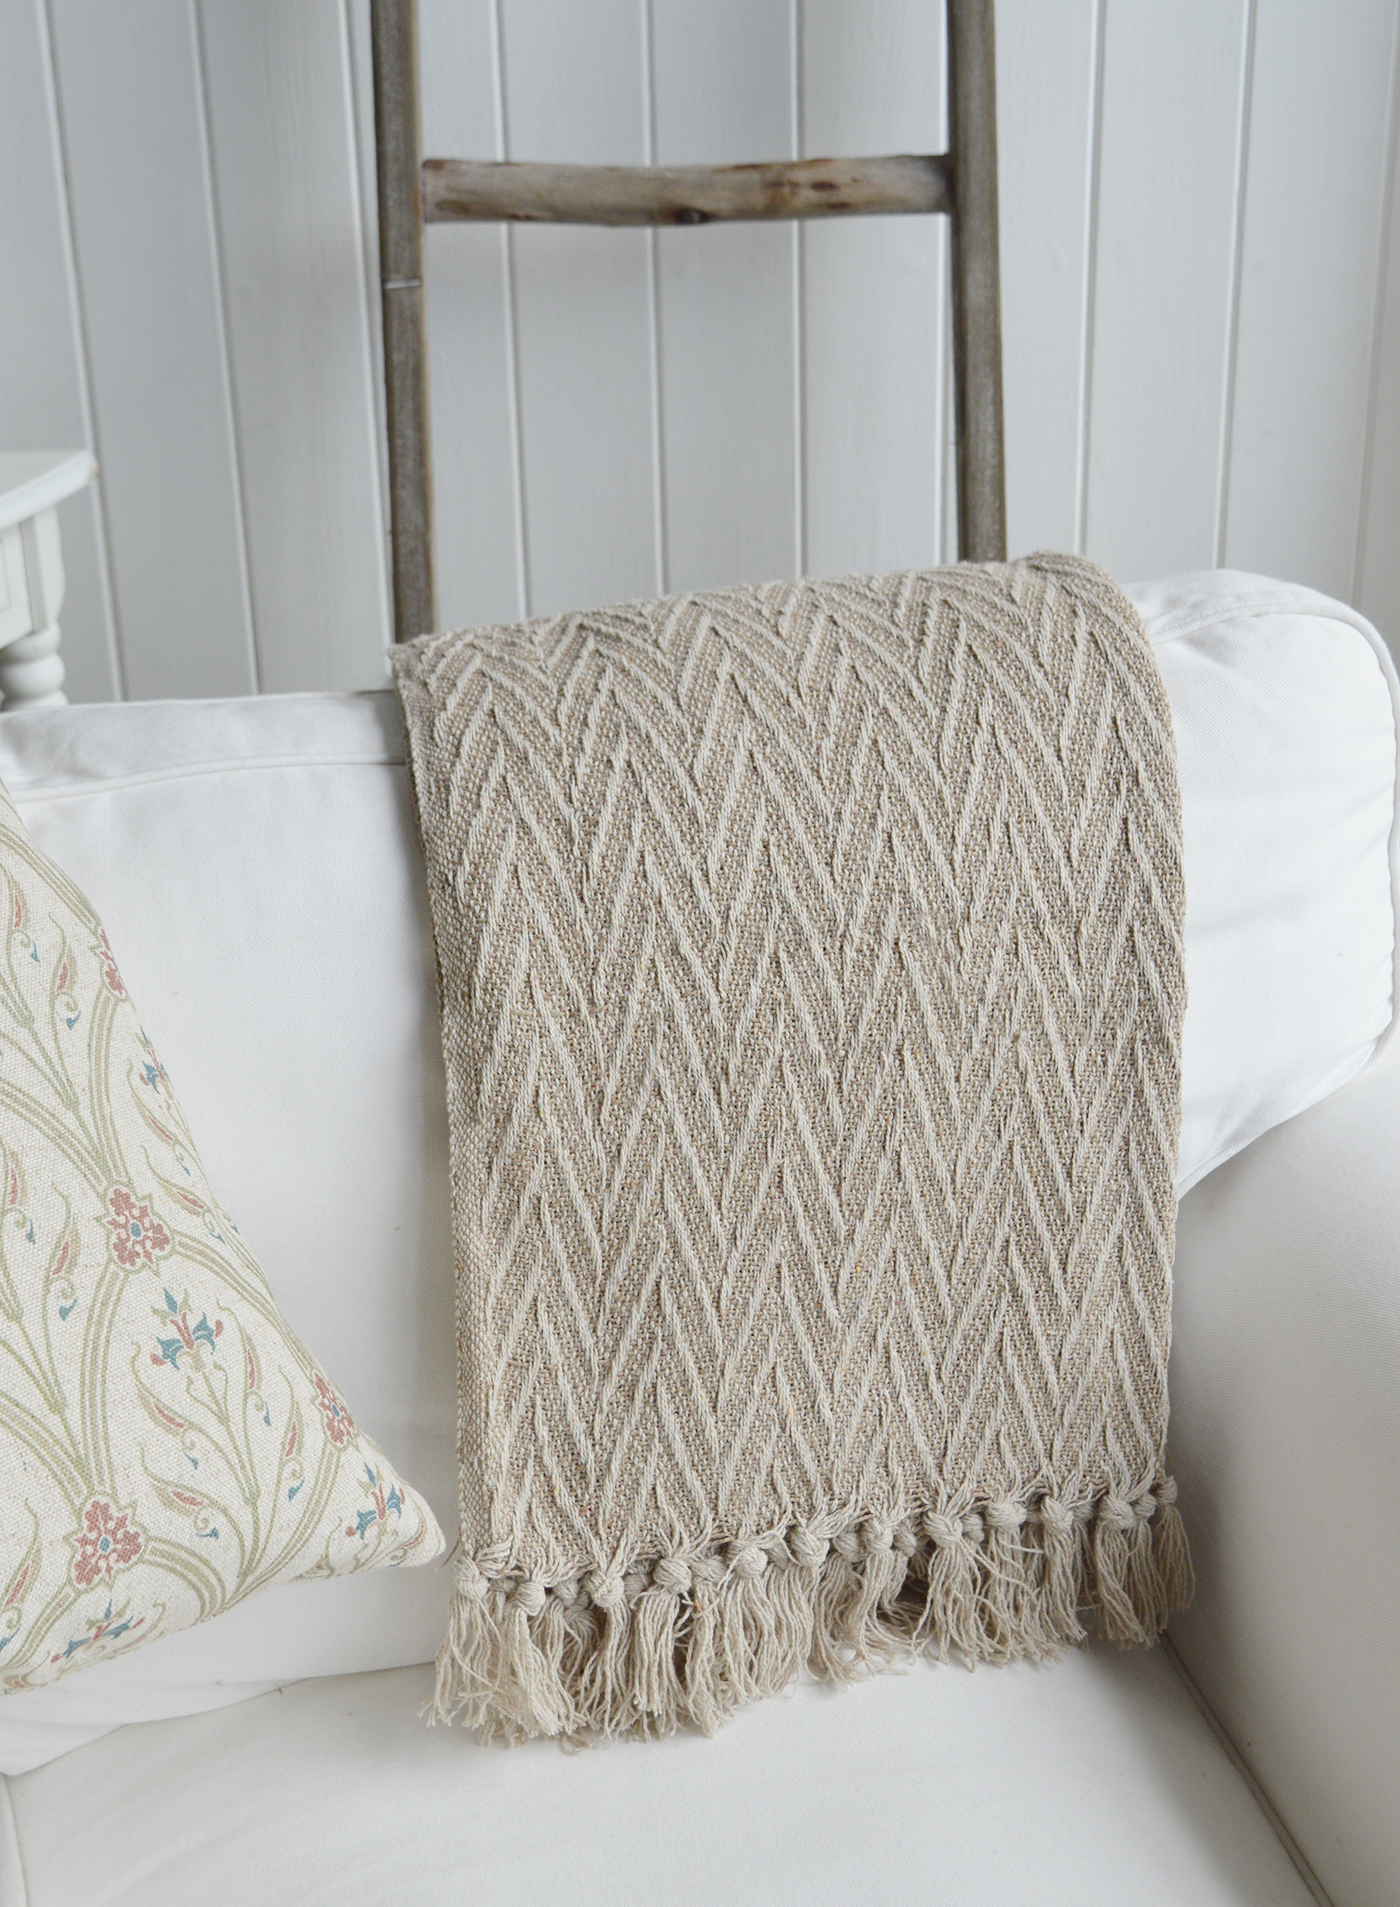 Stowe Throws, blankets for New England Style Interiors -  Neutral Beige Stripe